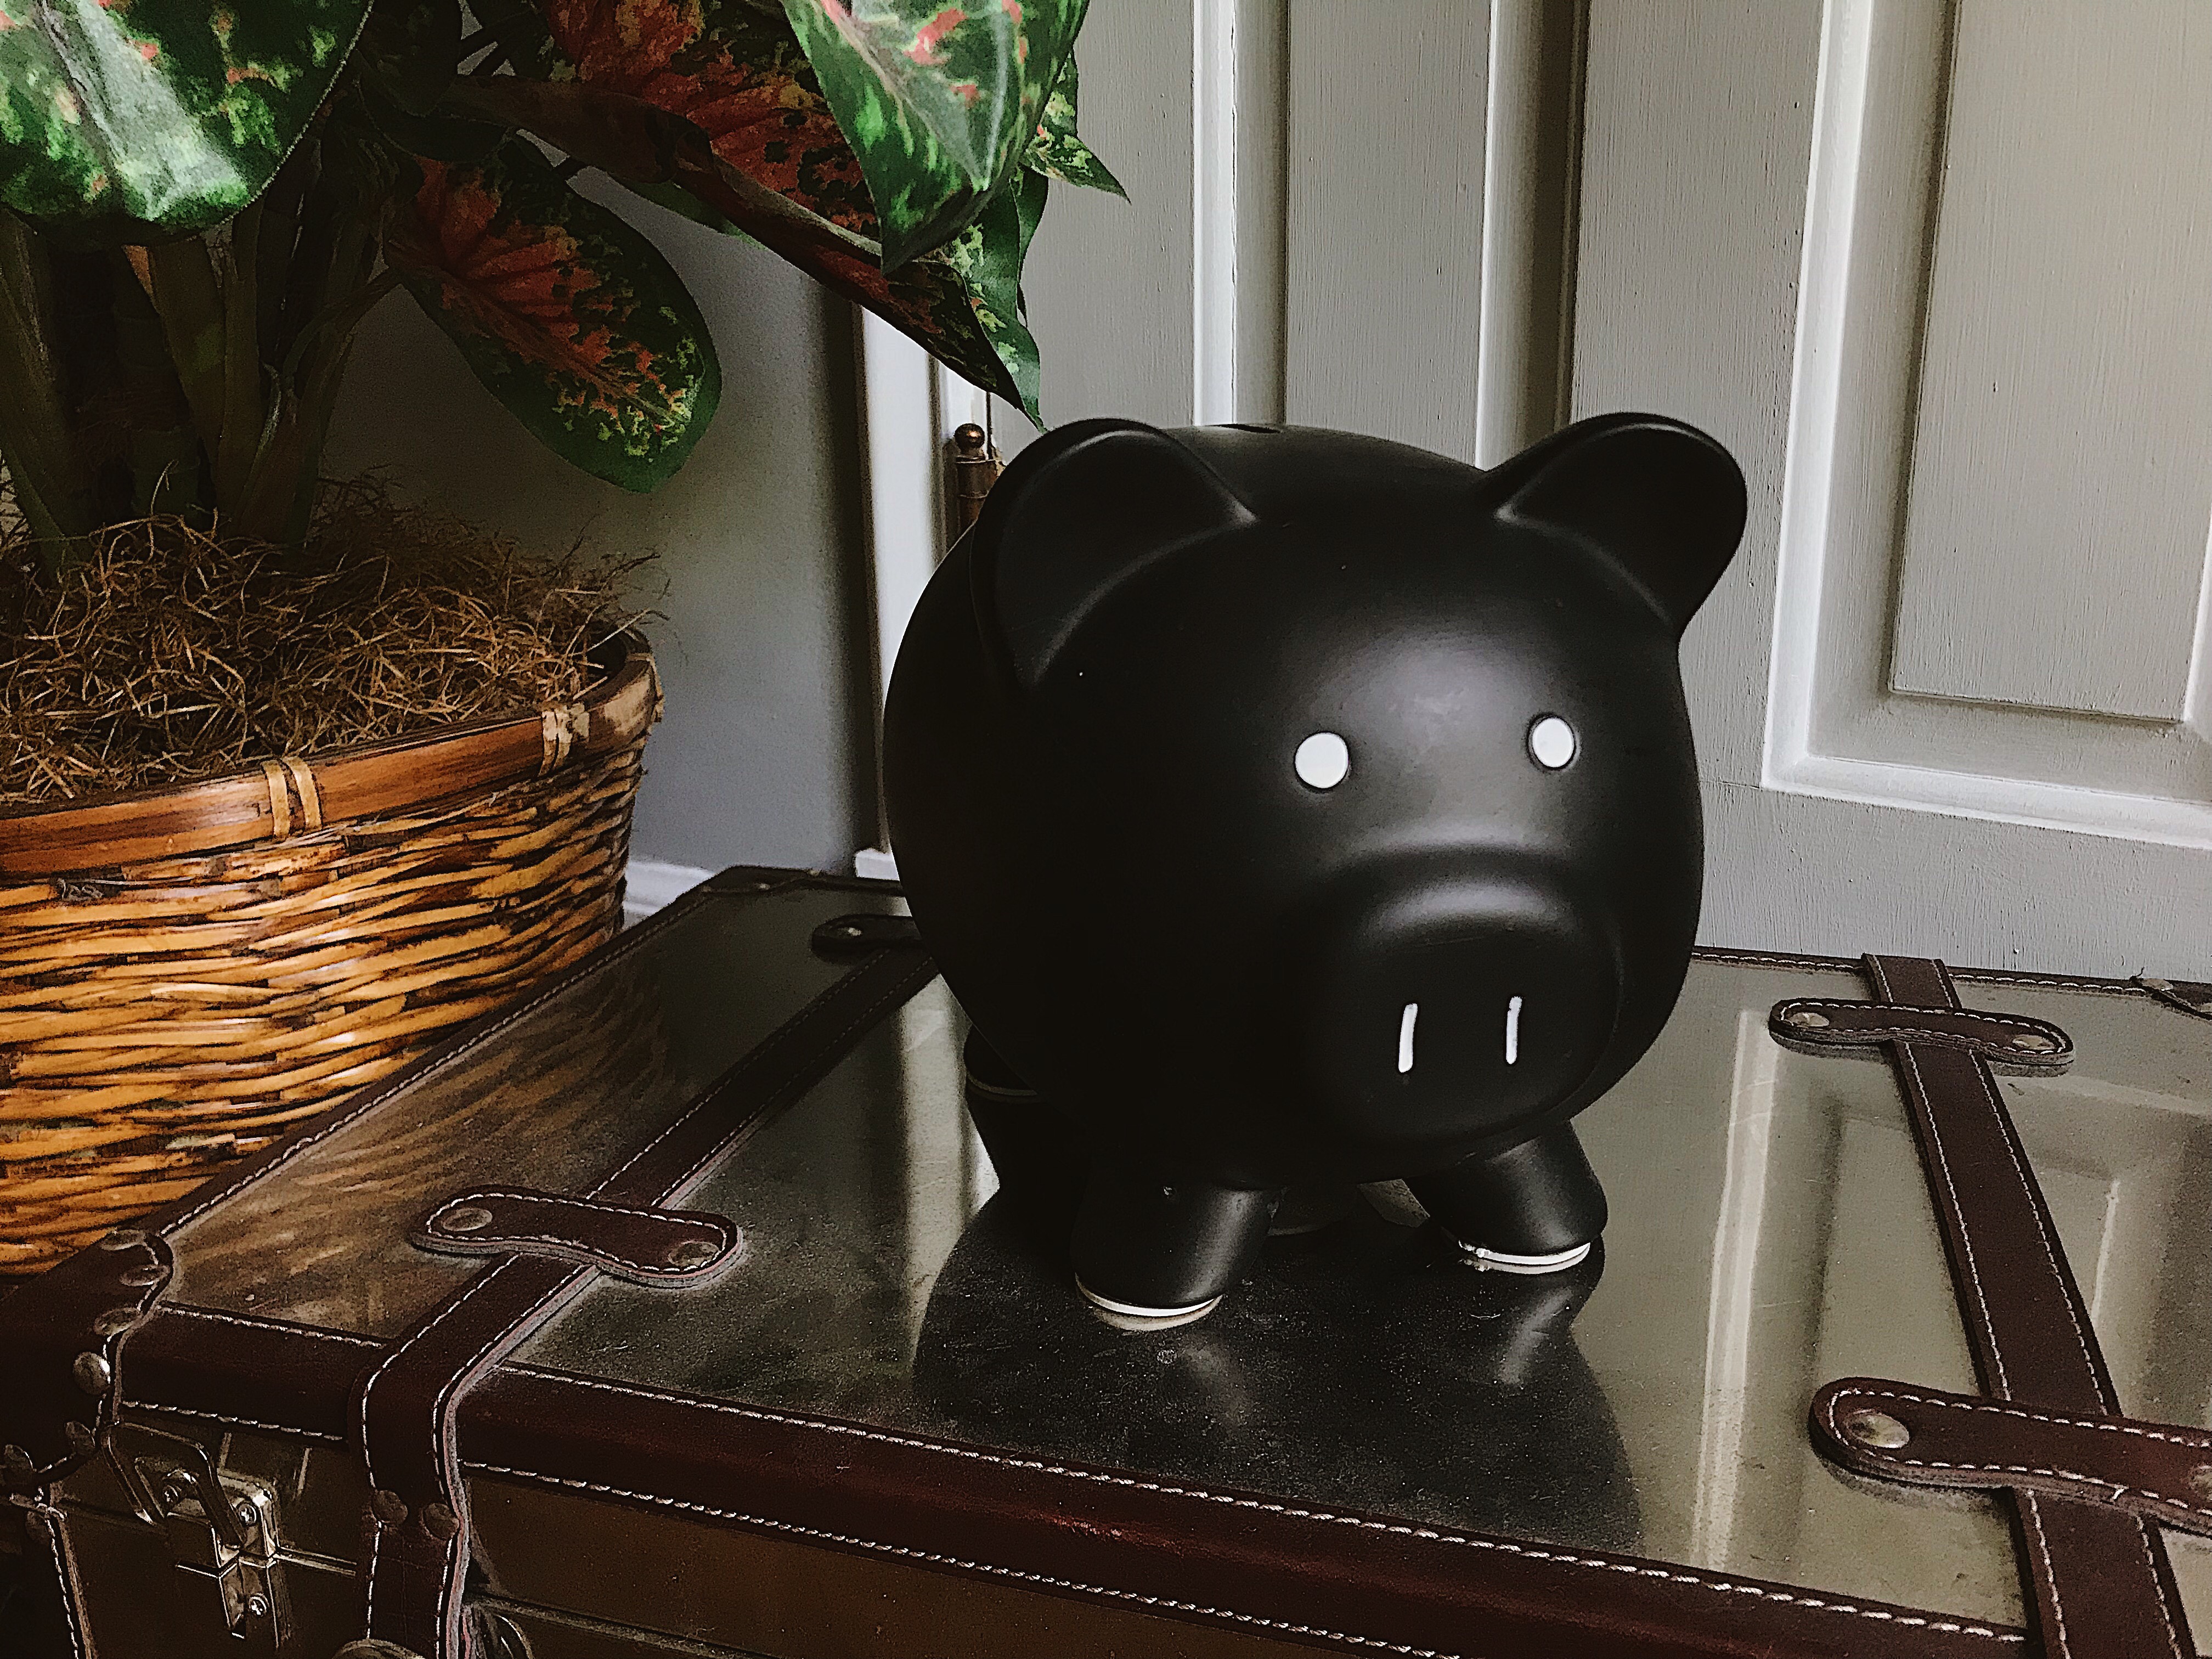 Photo of a black piggy bank with white eyes, snout, and hooves. Sitting on a metallic suitcase with a basket plant in the background.